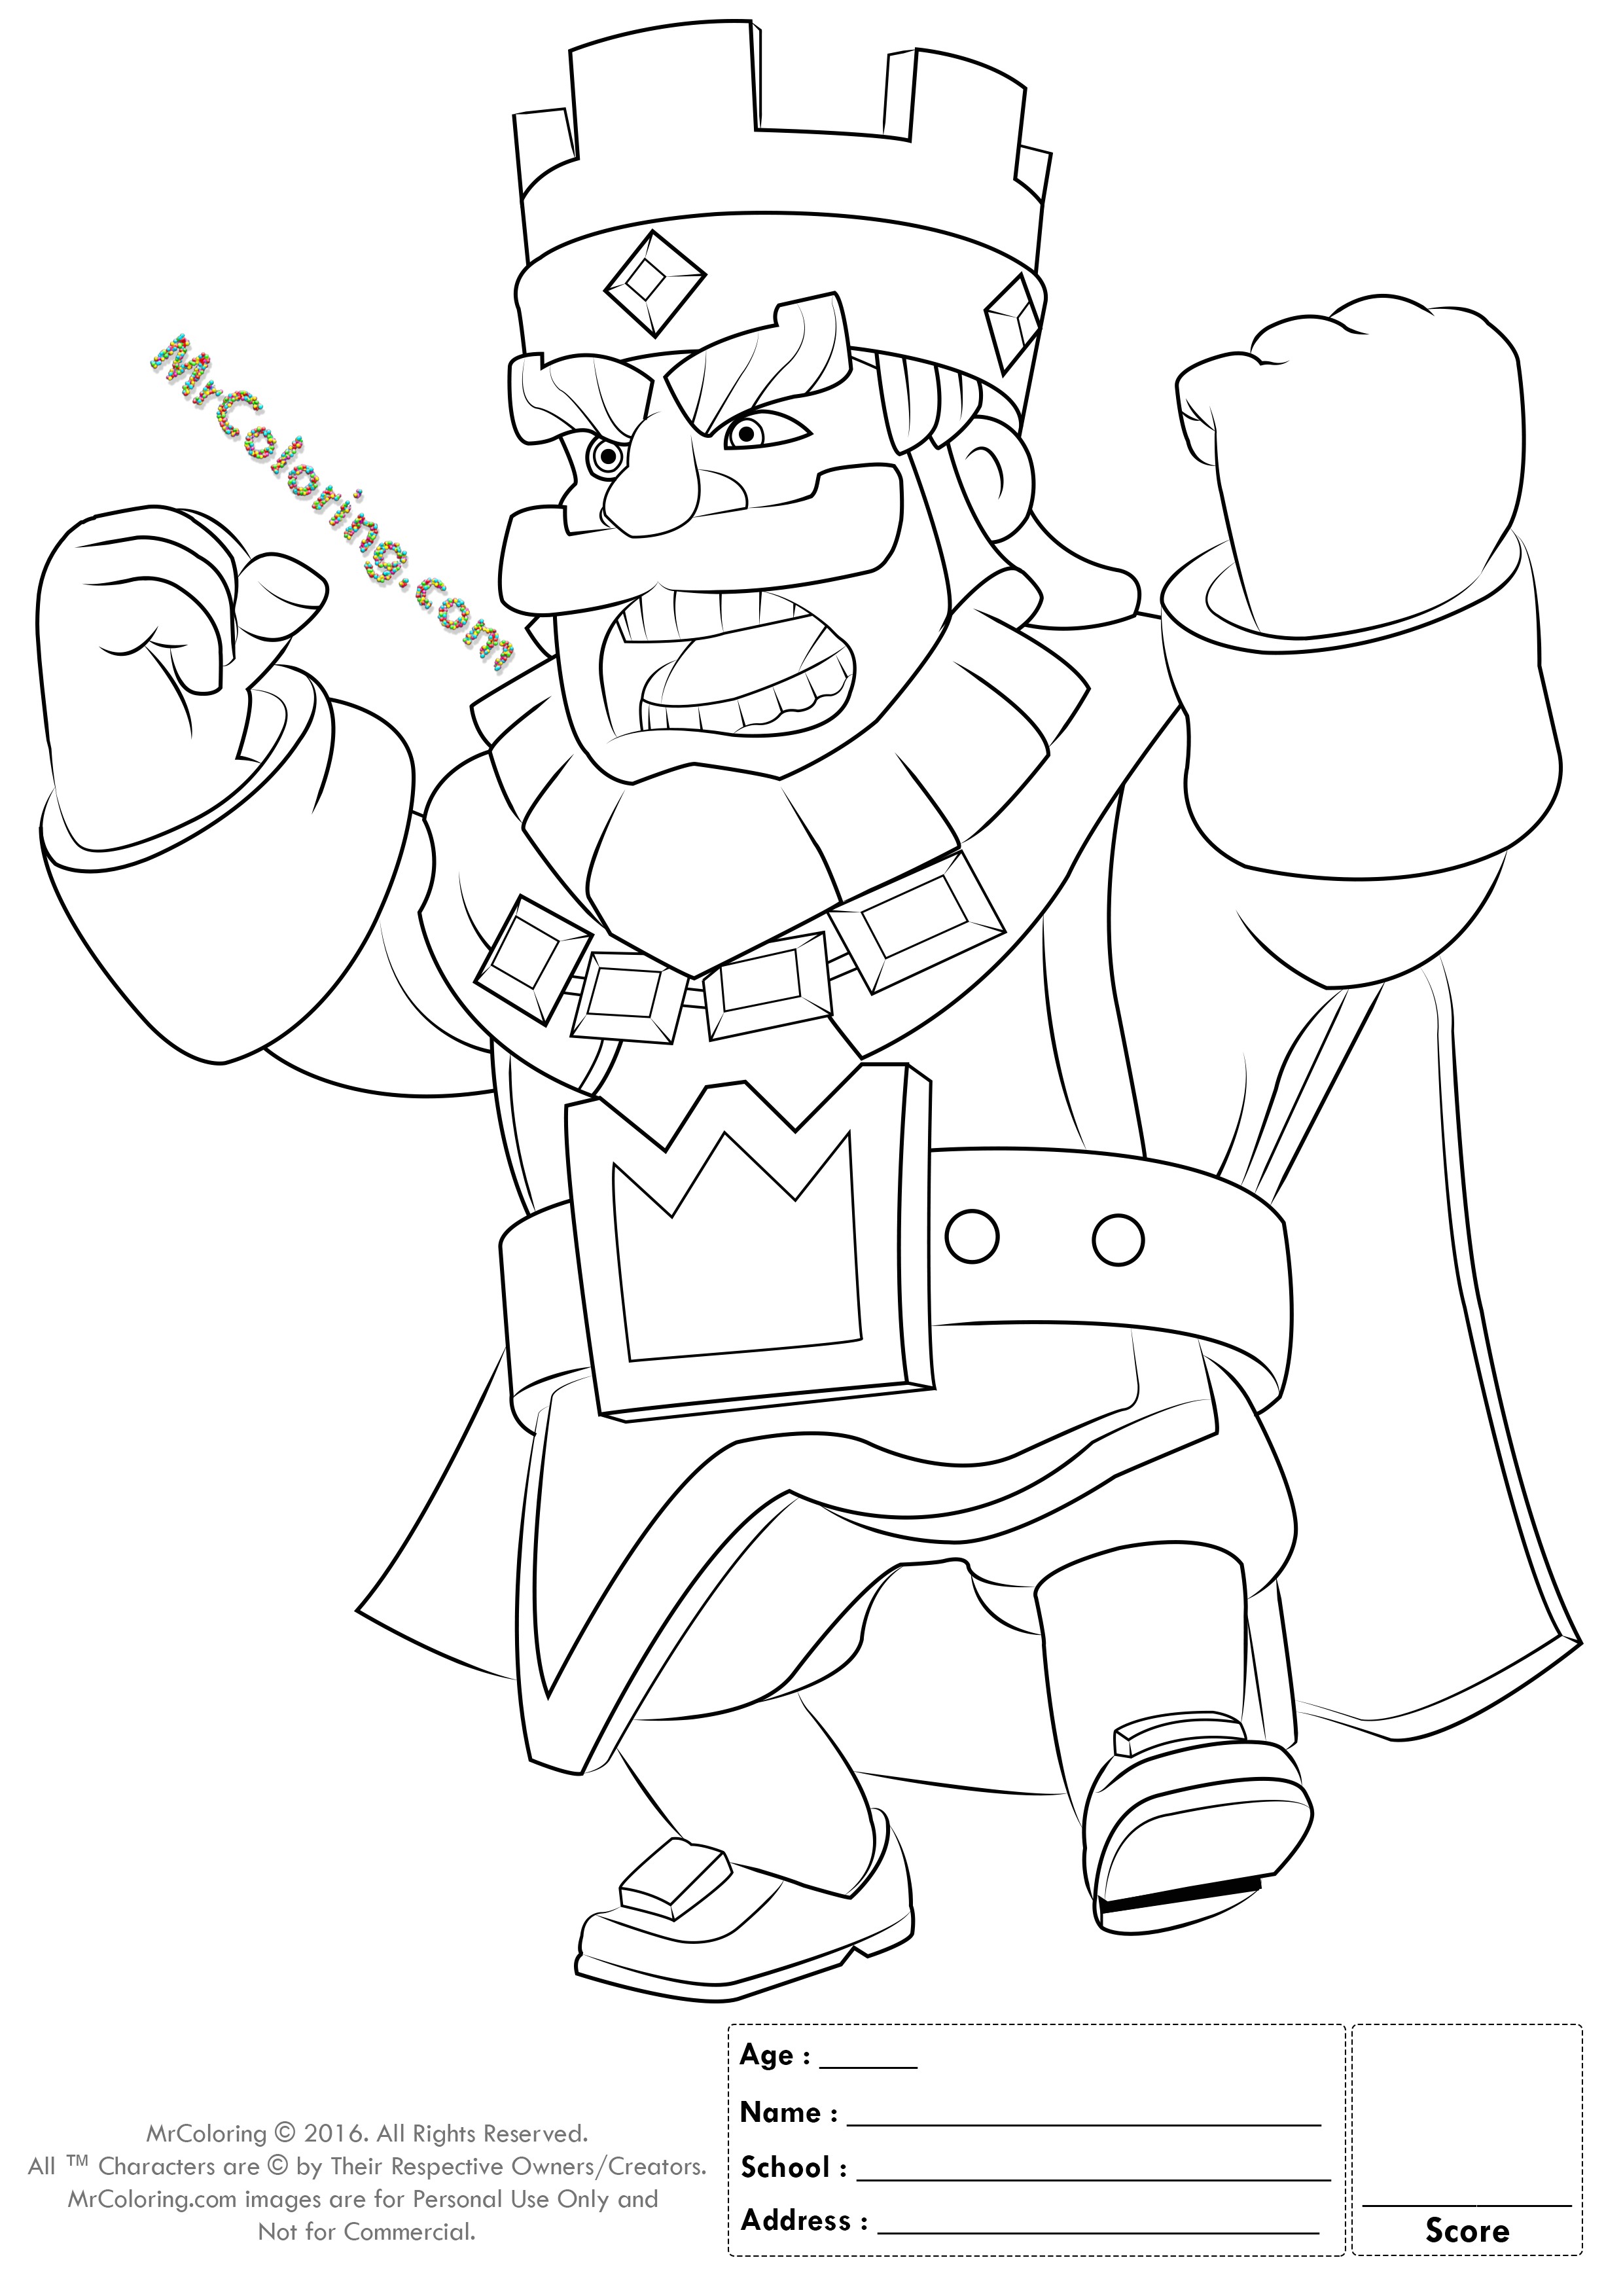 Printable Red King Clash Royale line Coloring Pages 1